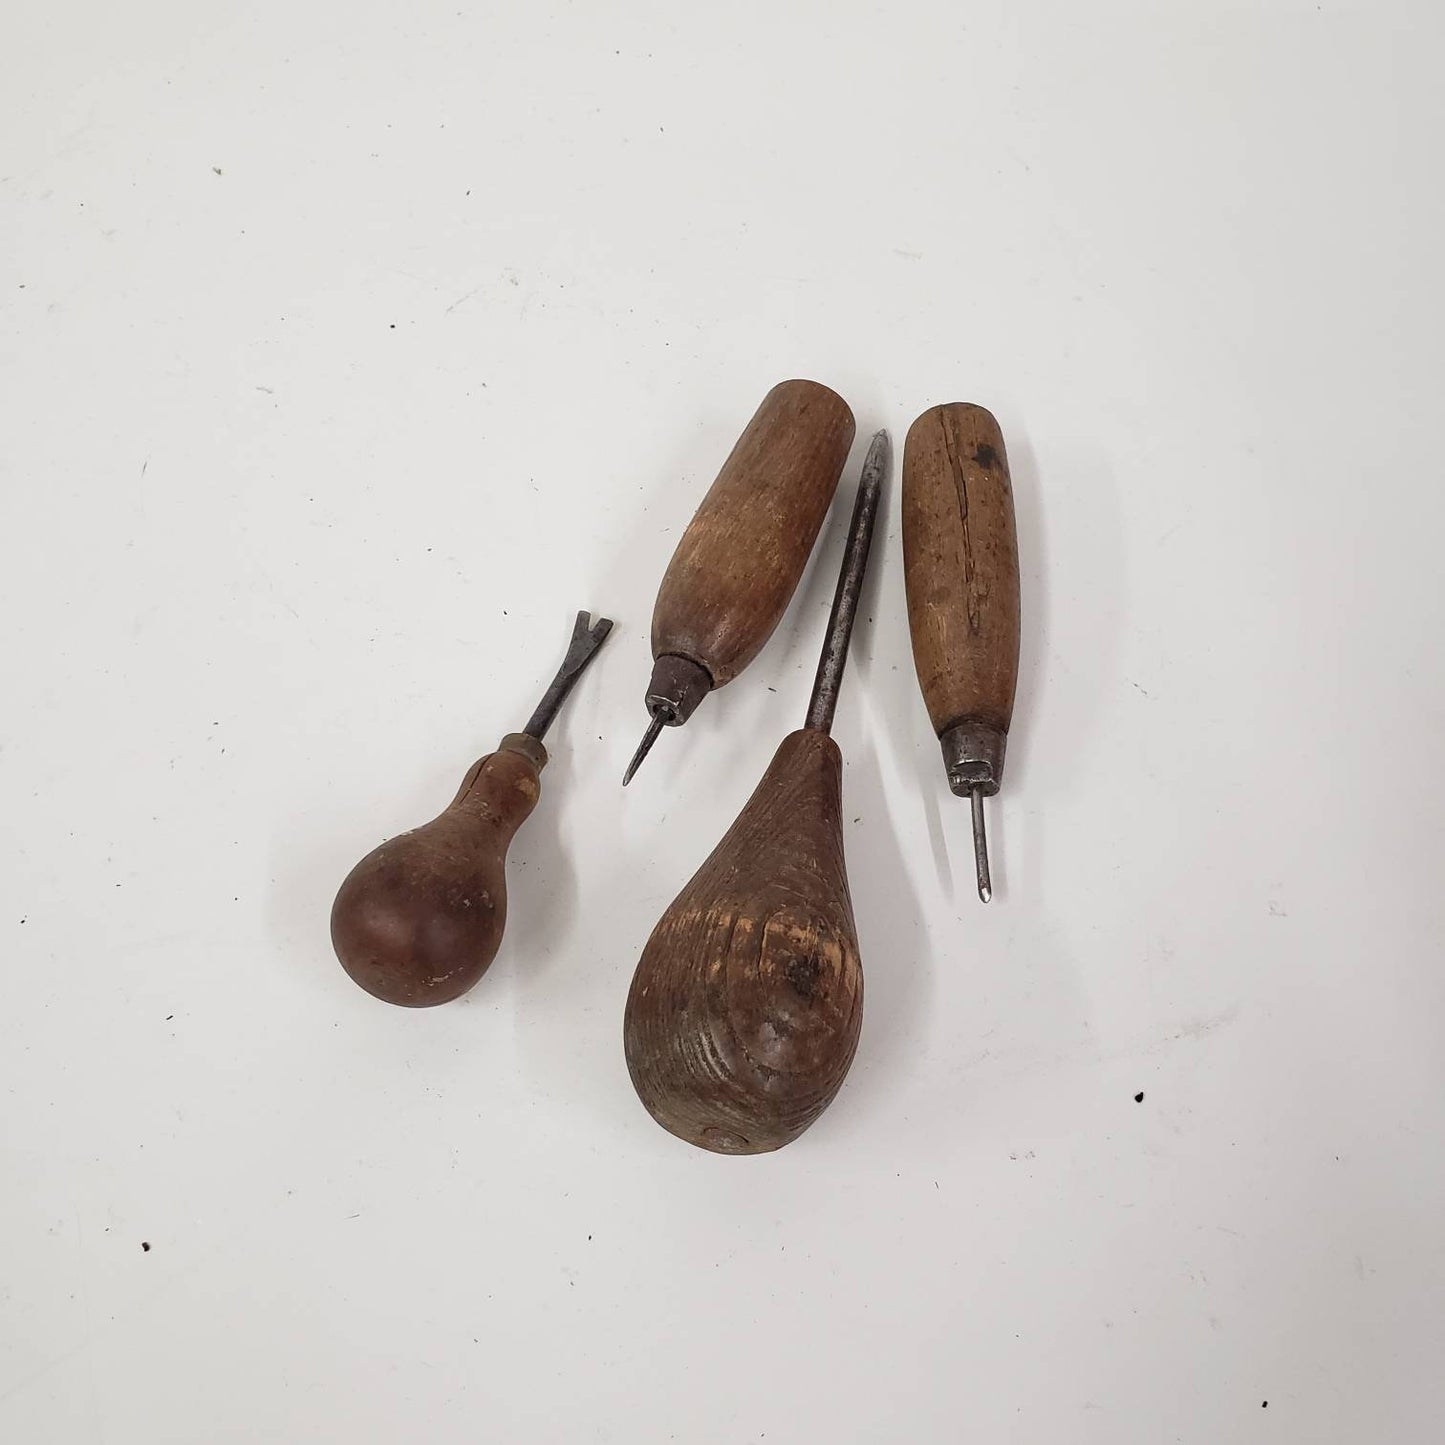 punches and awls set of four hand tools carpentry tools antique woodworking